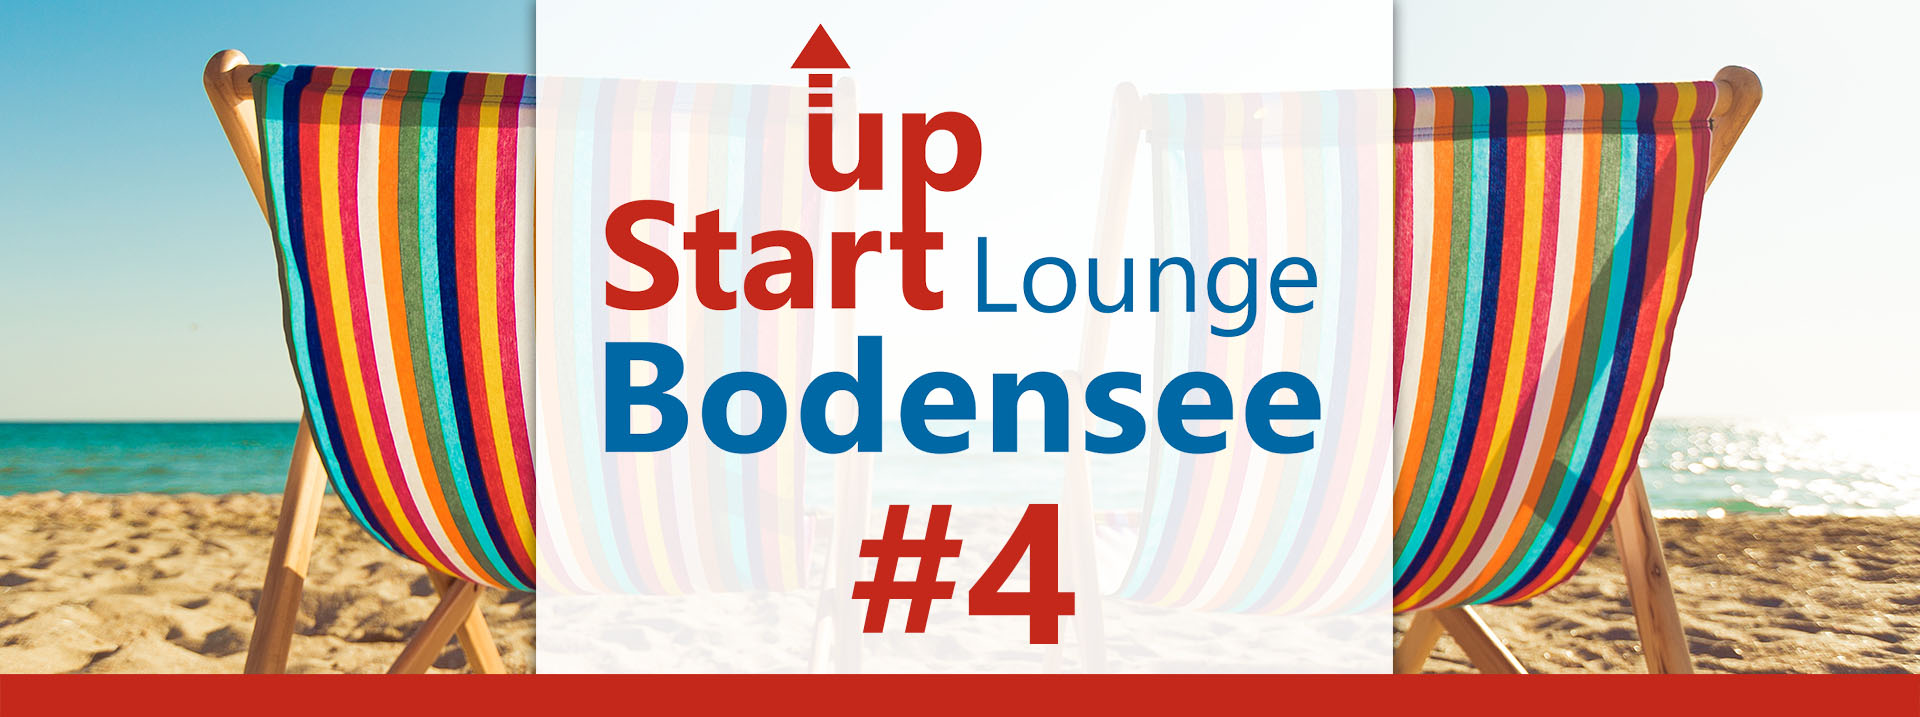 Startup Lounge Bodensee